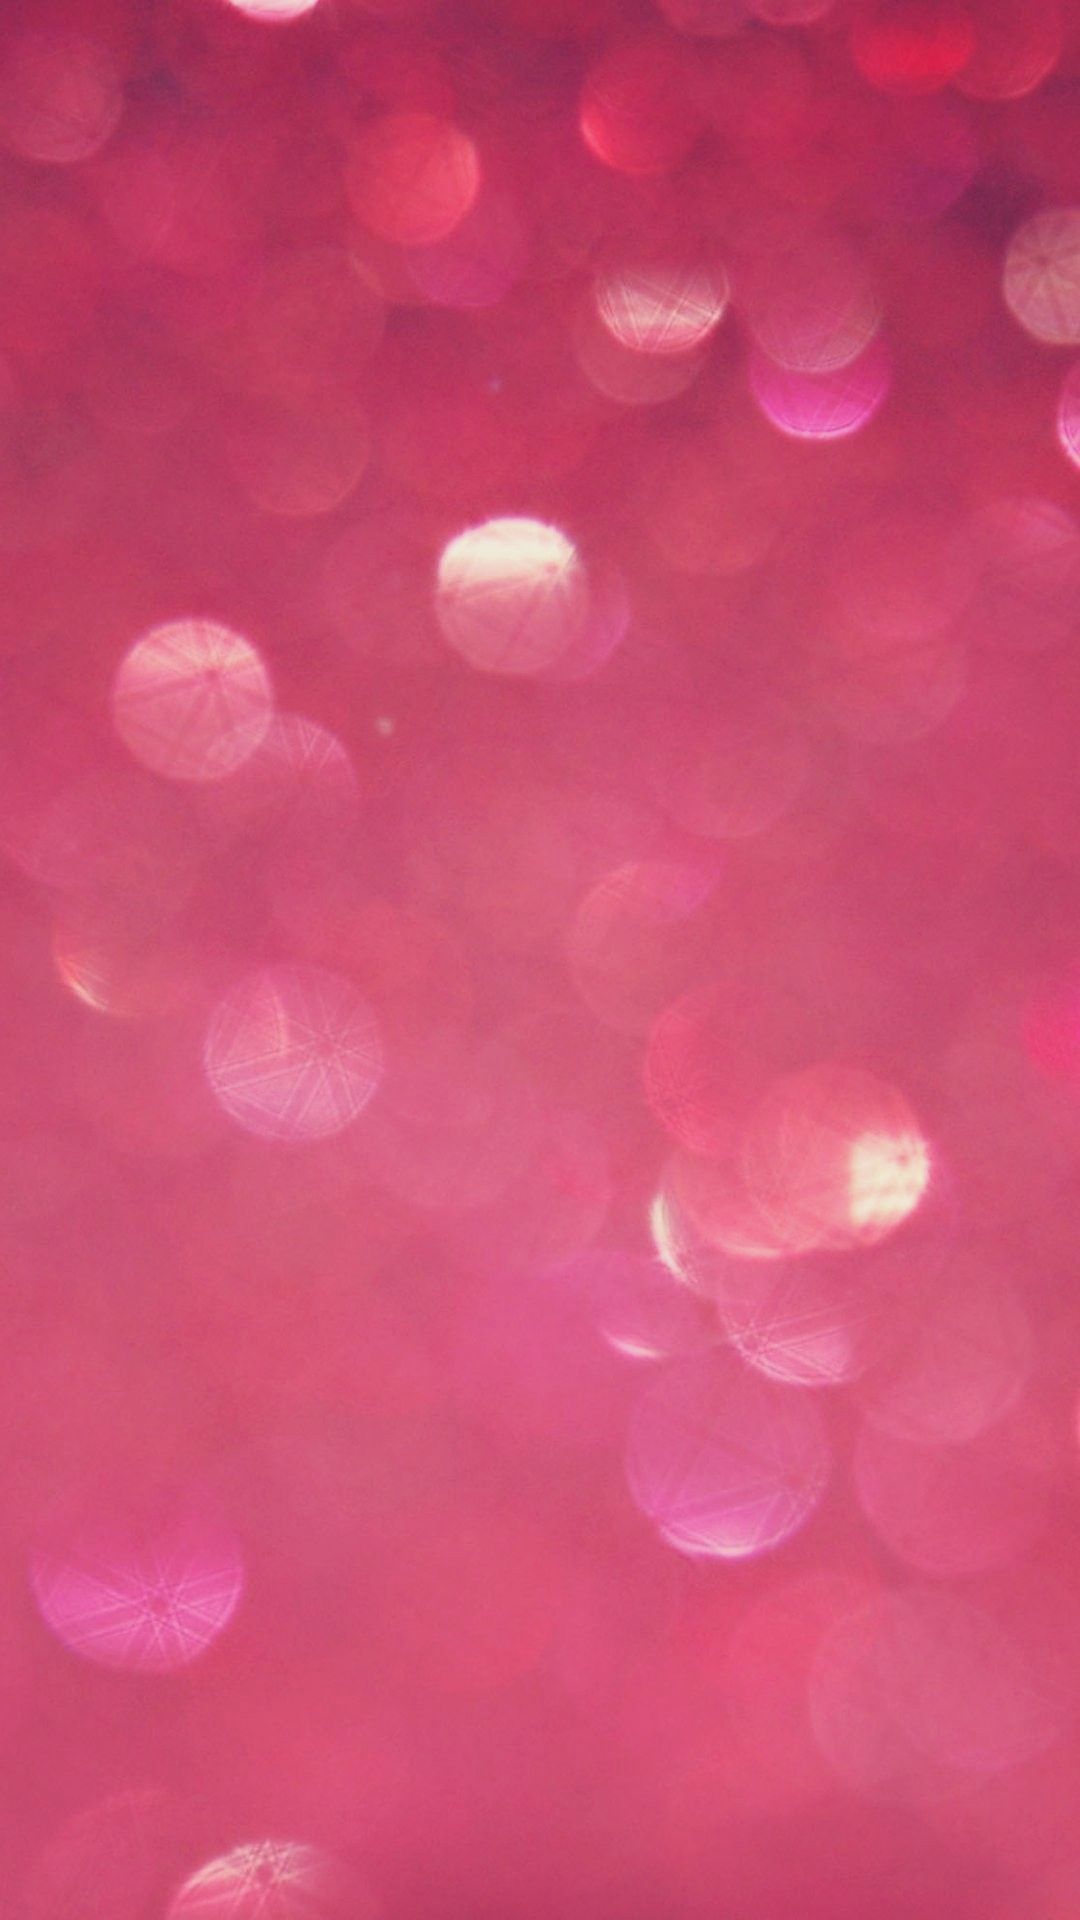 Glitter Pink And Gold Wallpaper Ios. iPhone wallpaper glitter, New wallpaper iphone, iPhone wallpaper image